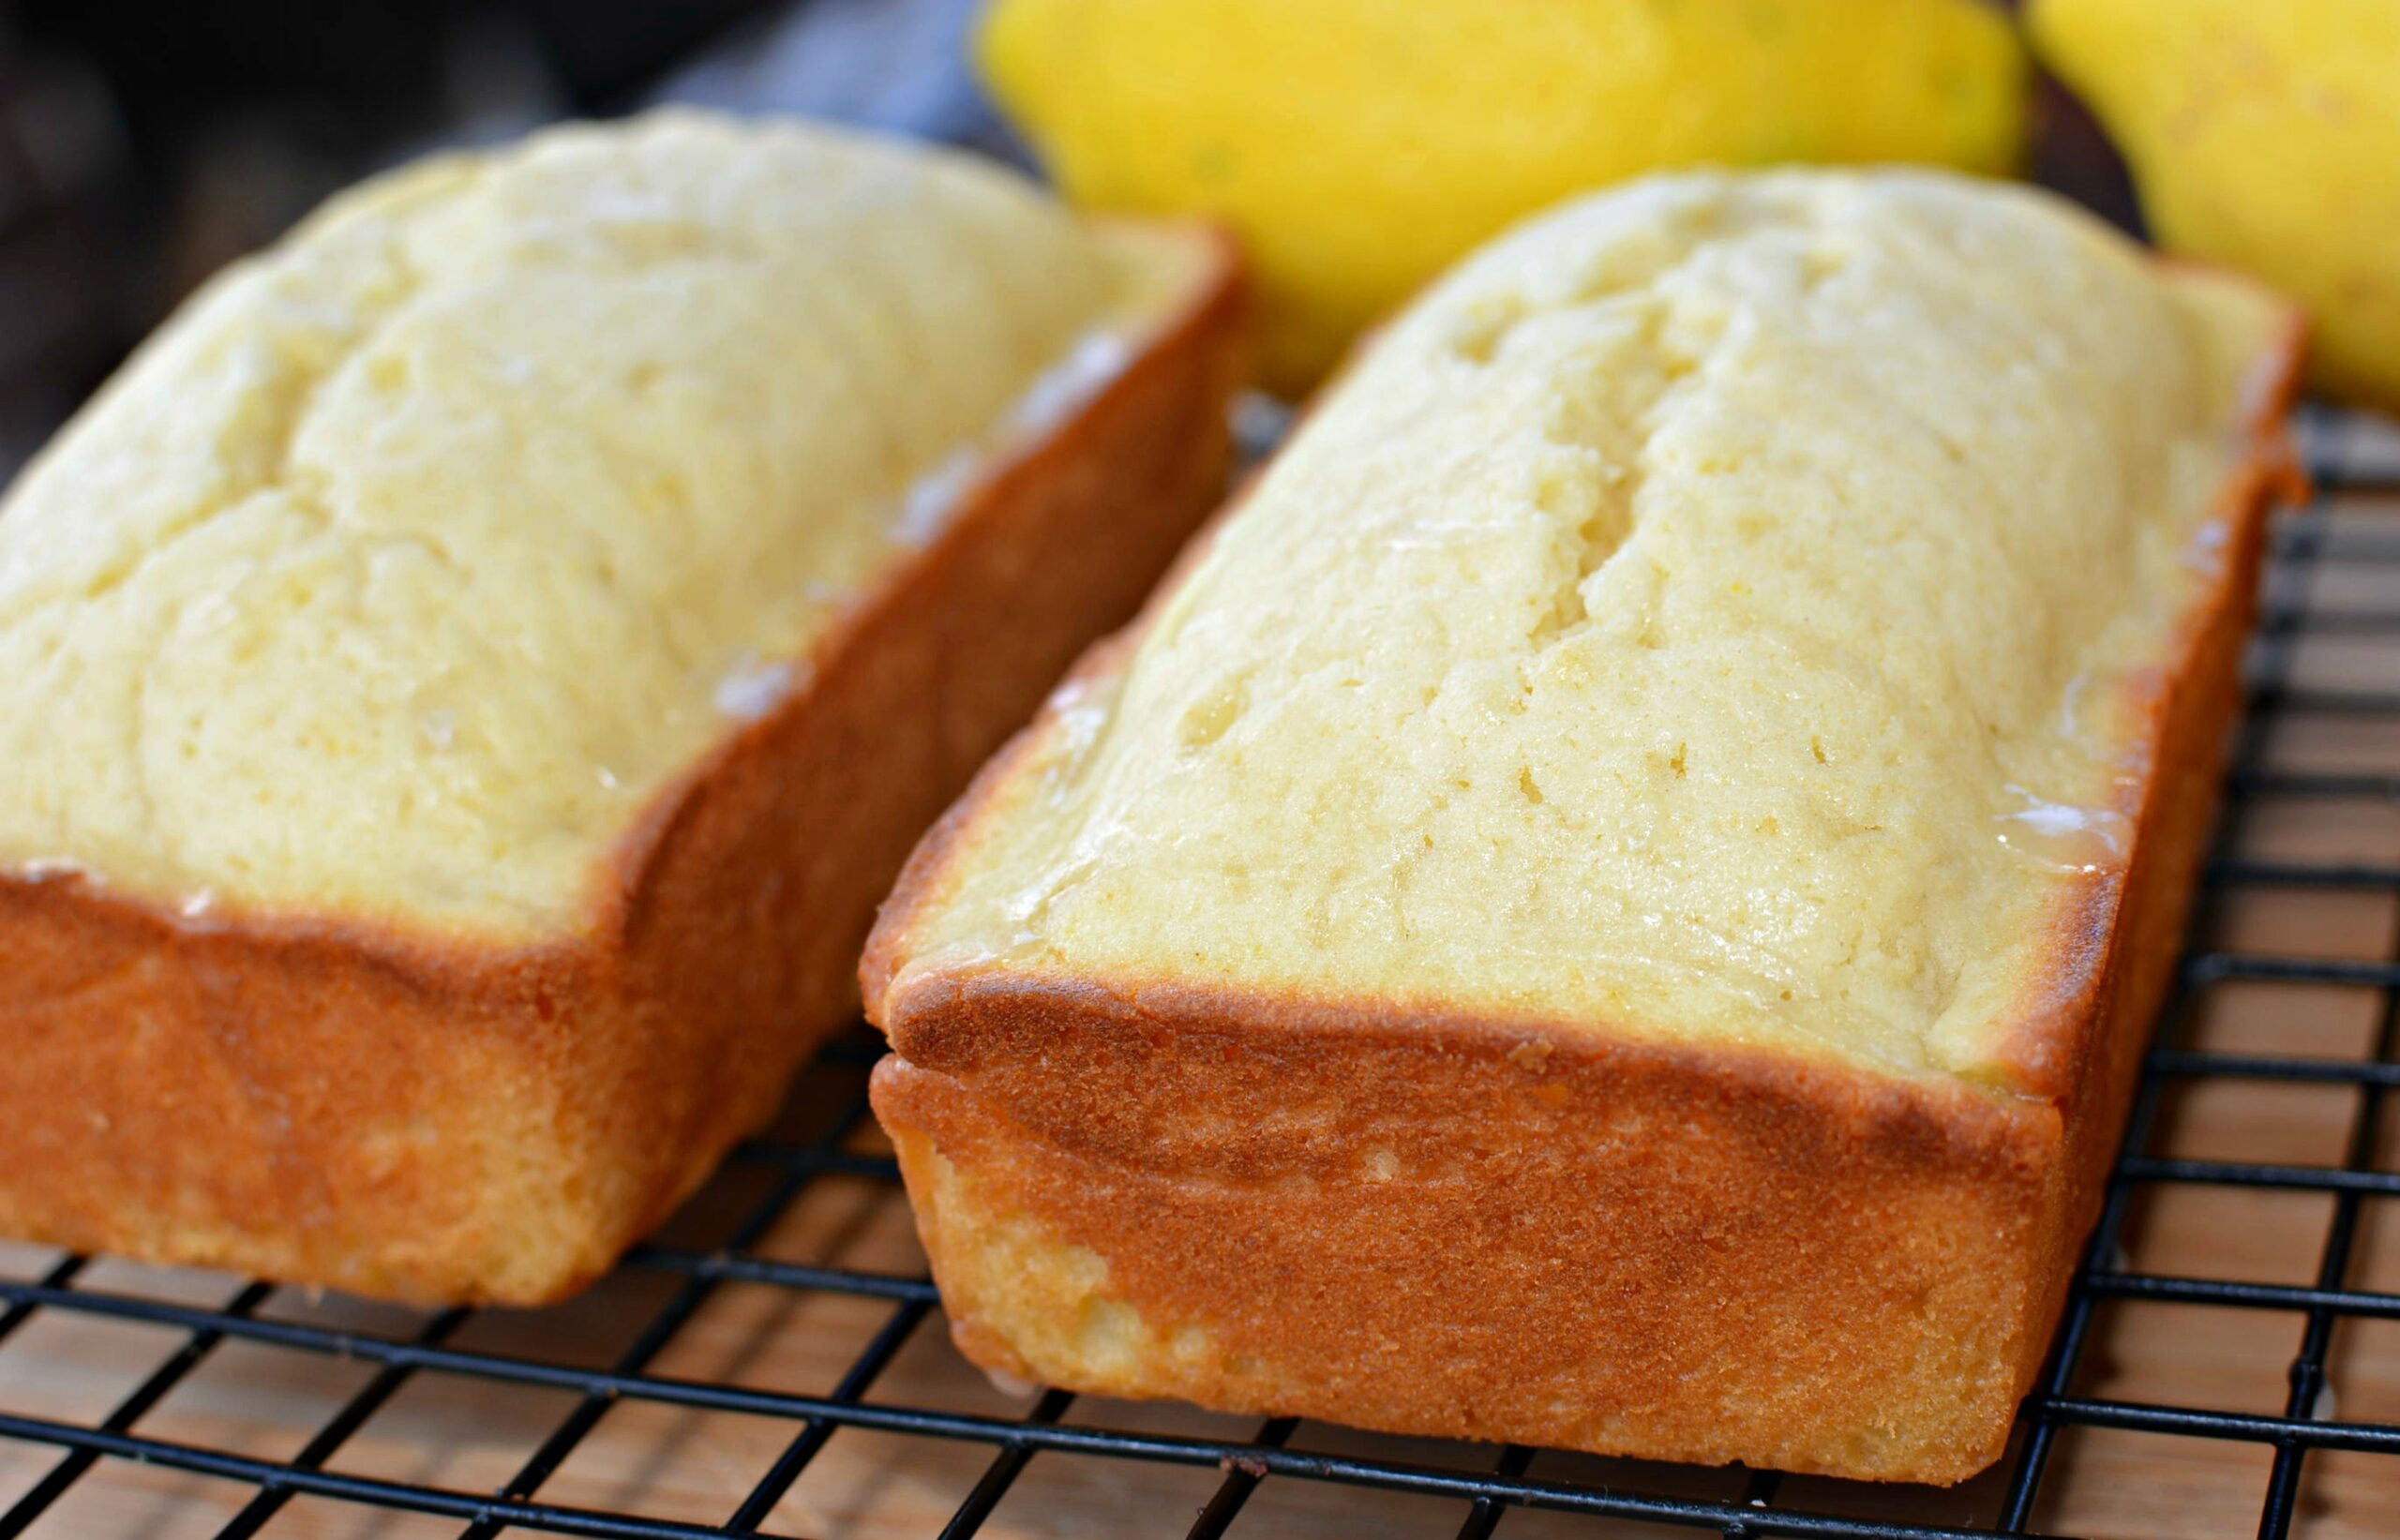 baked lemon bread cooling on a wire rack.